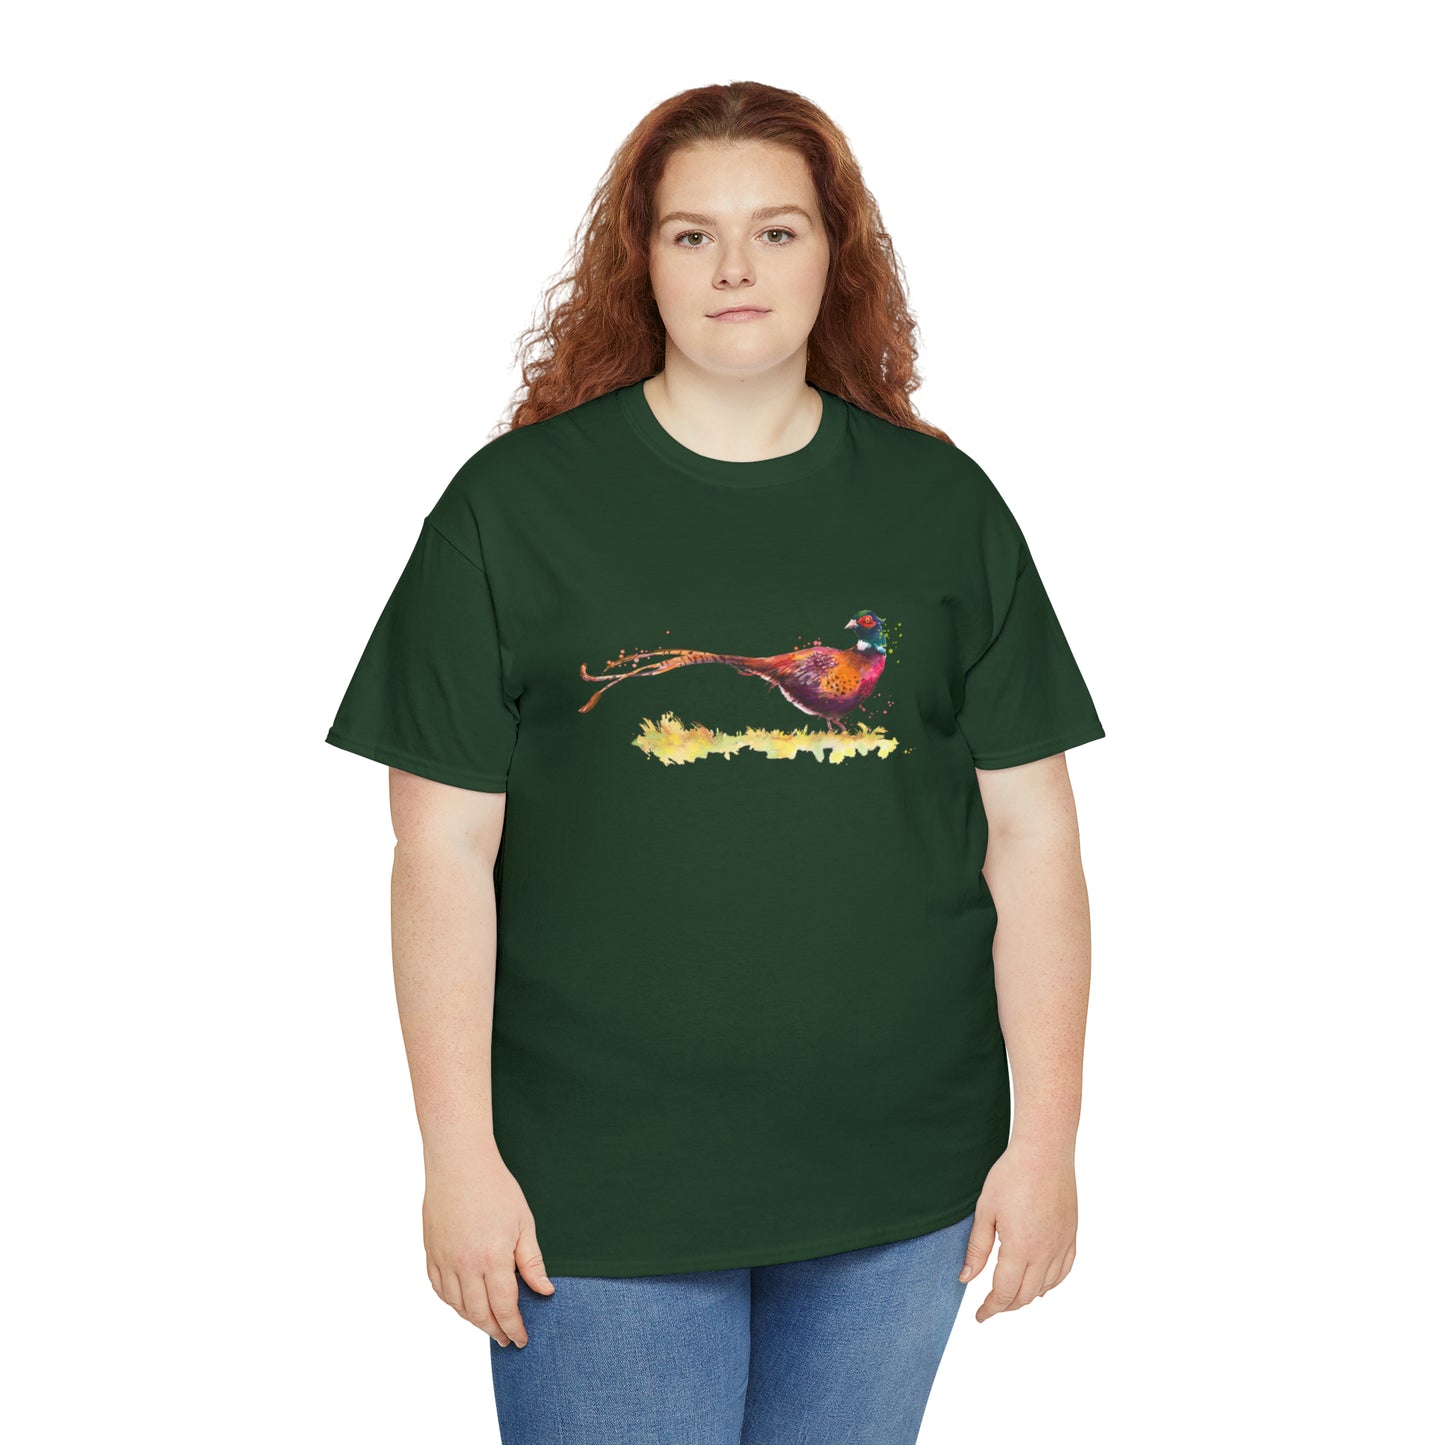 Mock up of a plus-size woman wearing the Forest Green shirt